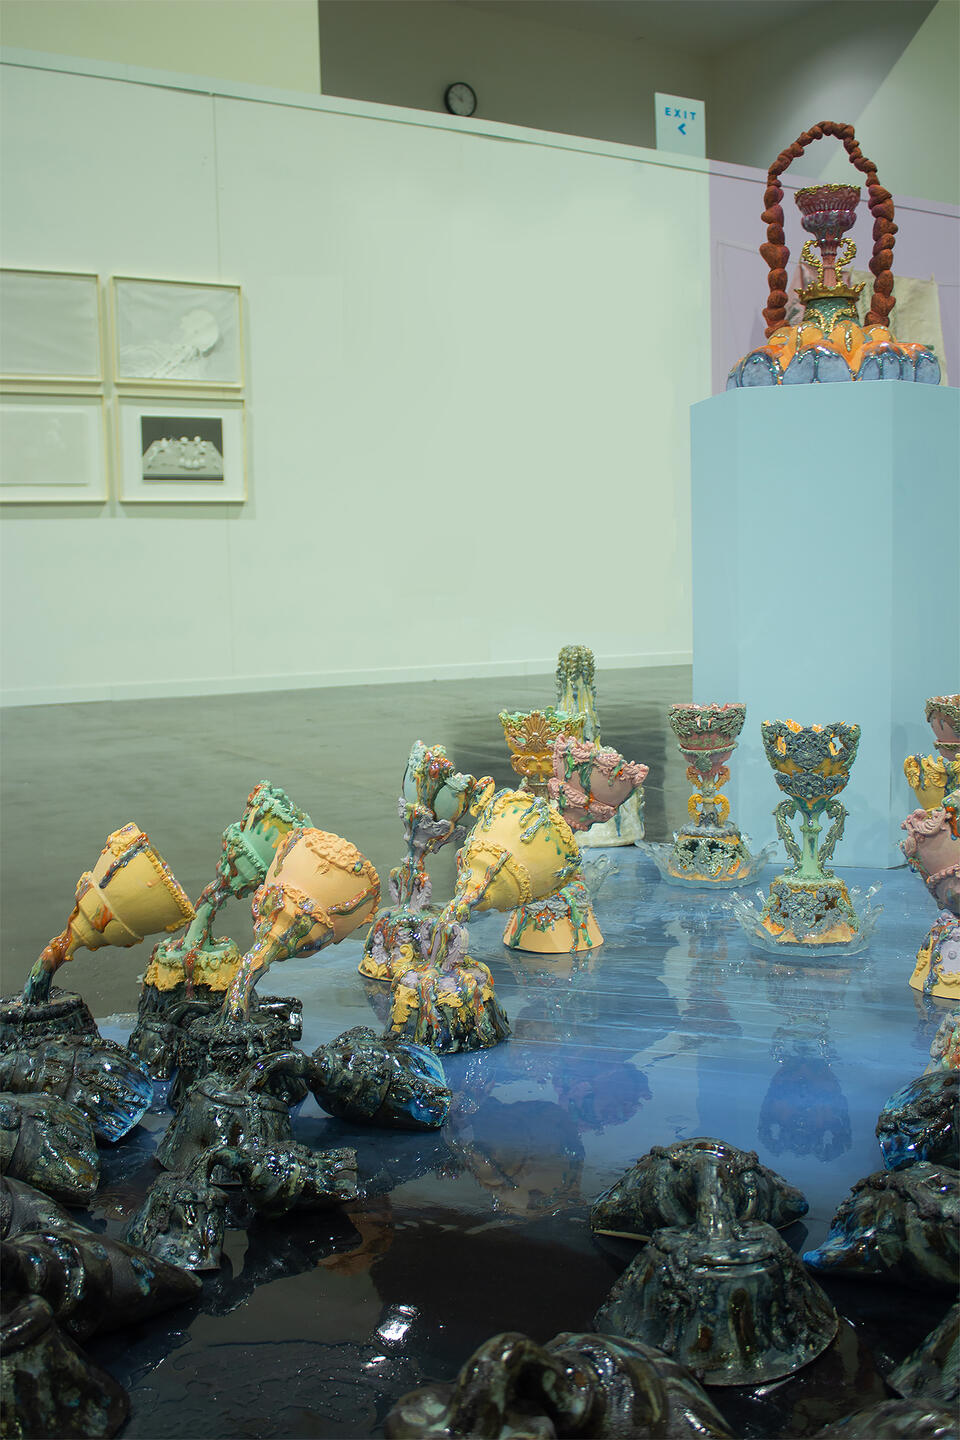 Colorful ceramic vessels arranged in clusters on a reflective surface, with a central pedestal holding an elaborate piece. The holy grails are gradually changing colors.   